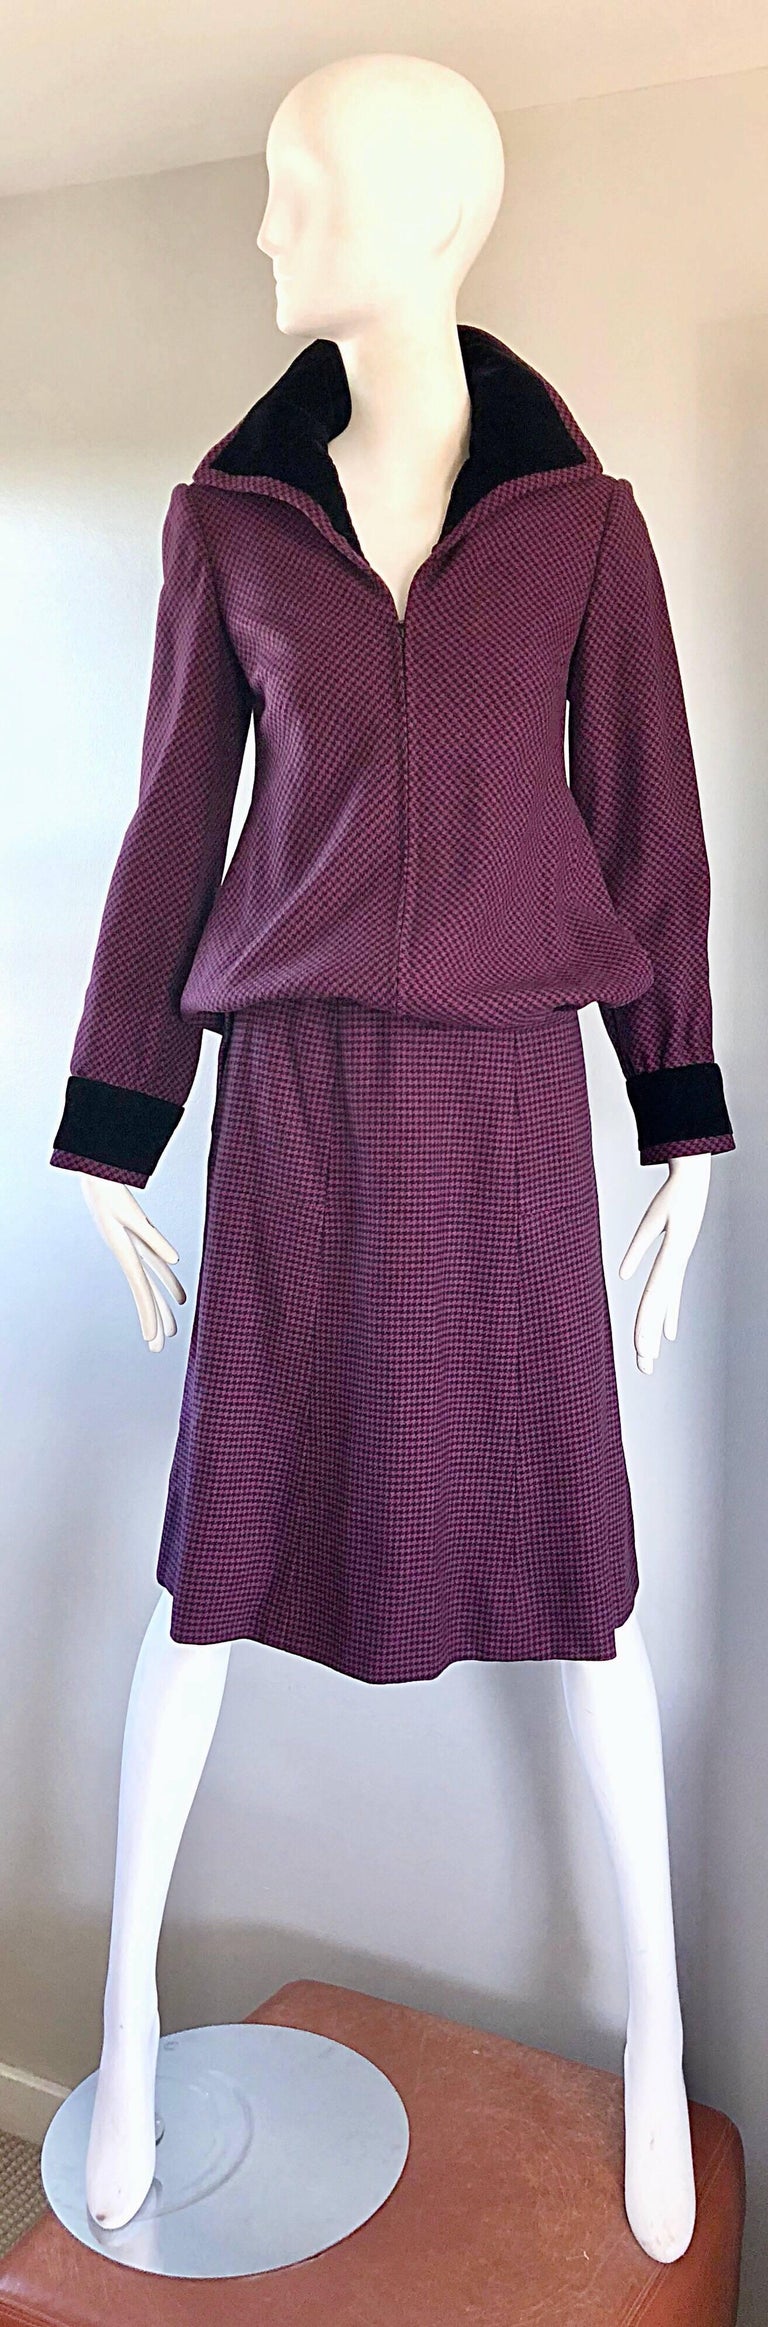 Chic 1970s CARDINALI original sample two piece virgin wool skirt suit! Comes from Marilyn Lewis', Cardinali's founder and designer, personal wardrobe. Vibrant purple and black mini checks on a soft virgin wool. Avant Garde jacket features an